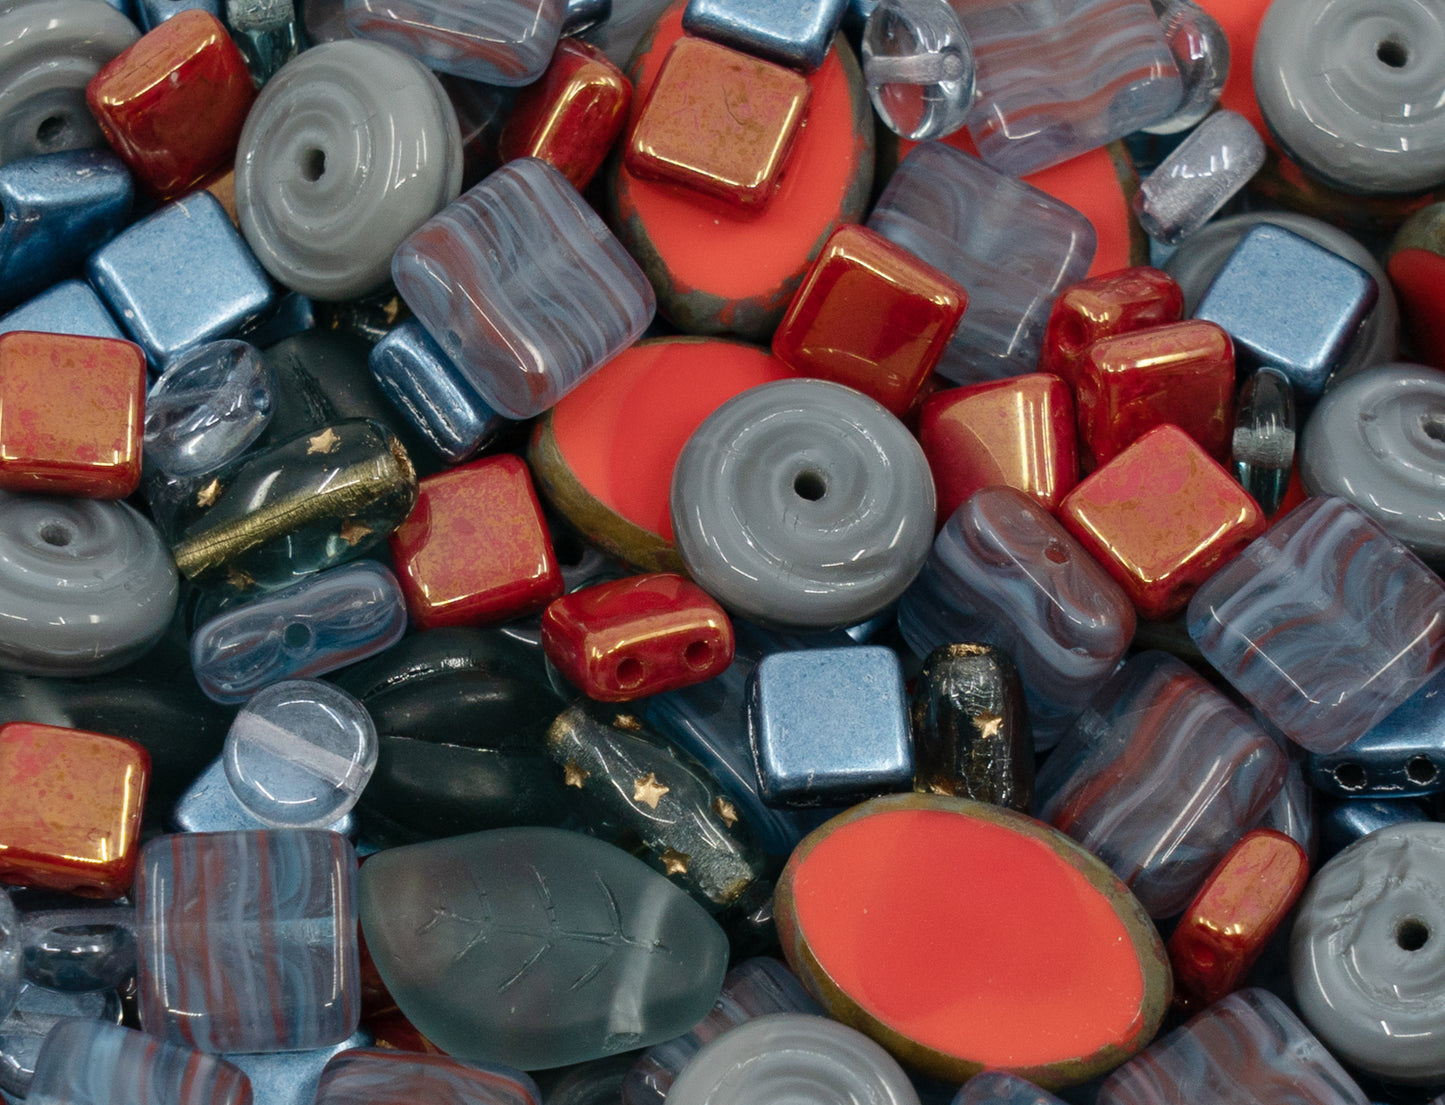 LIMITED Mix of Czech Glass Beads Table Cut, Matte and Glossy, Faceted Fire Polish, Hand Made Set Kit, Gray Coral Lava